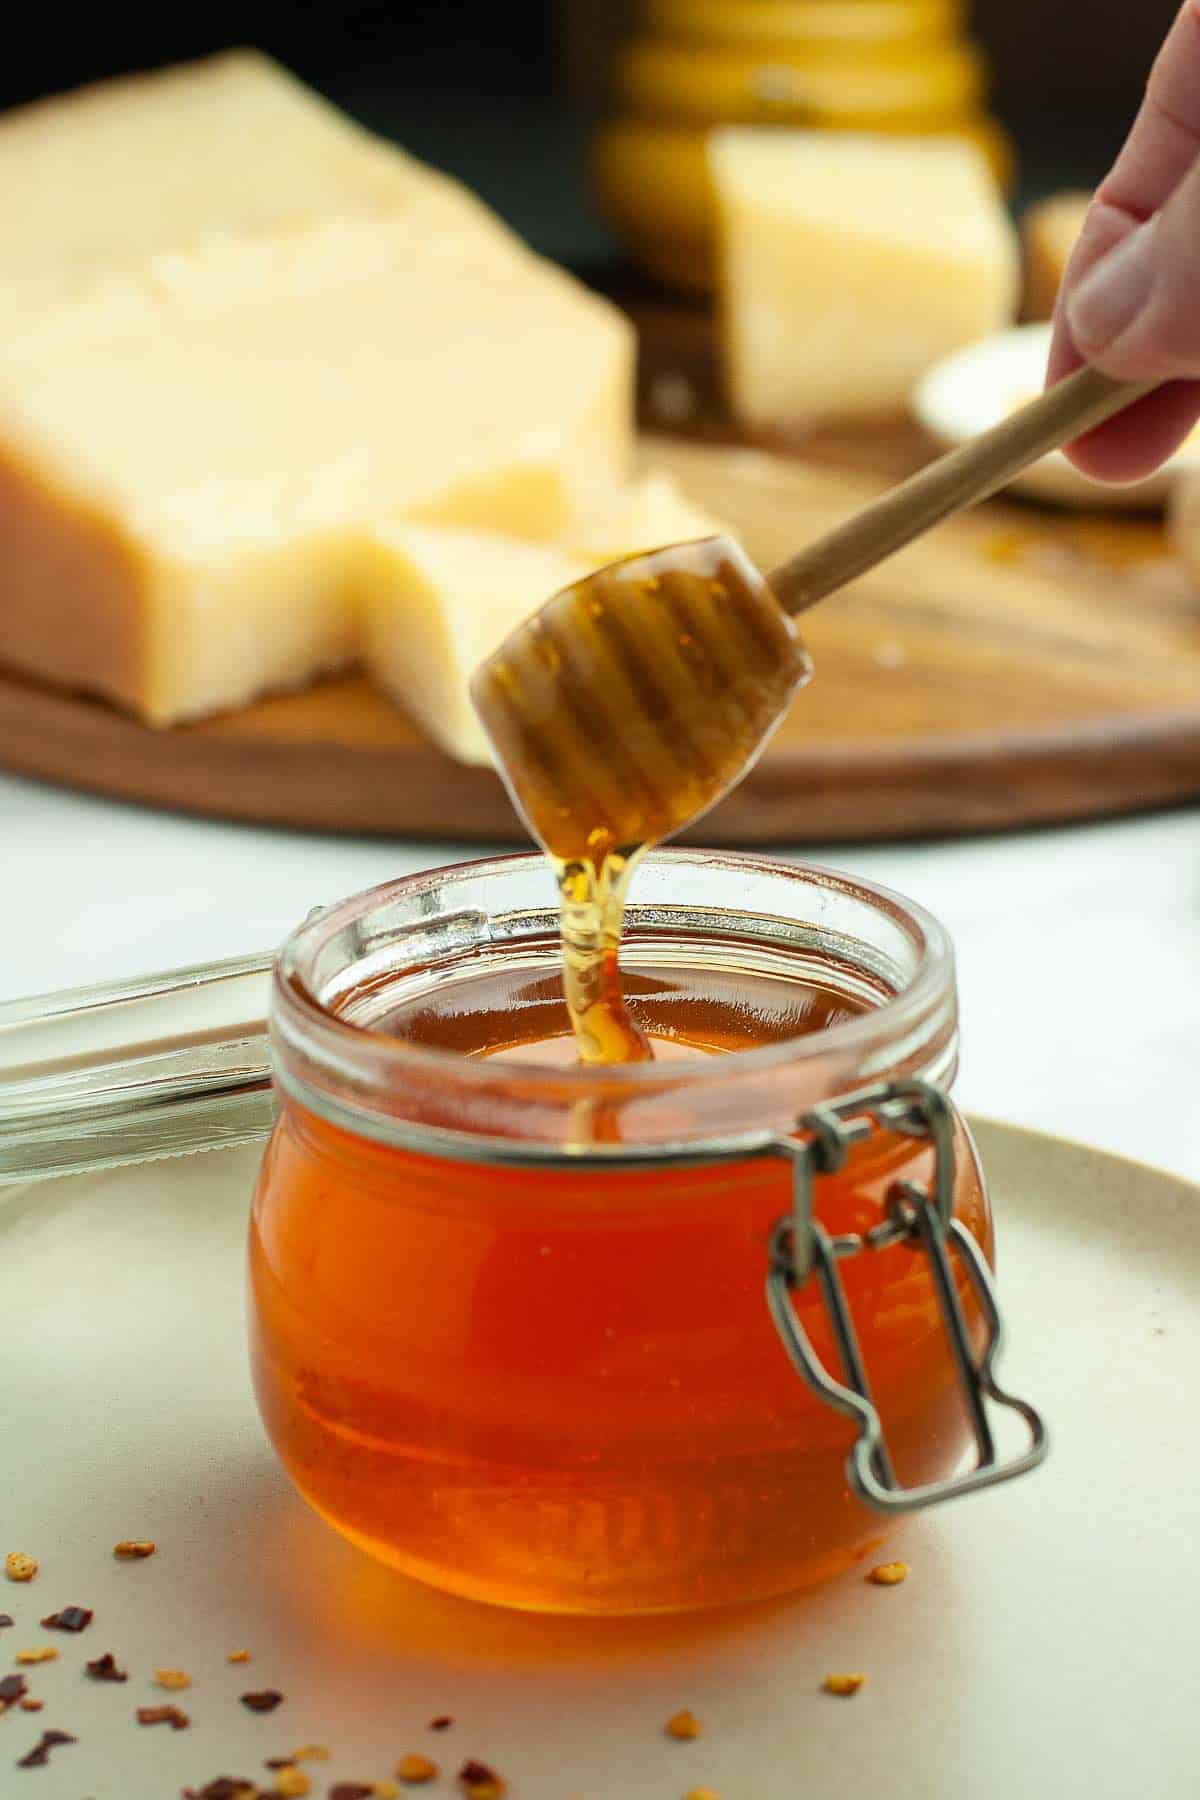 Dipping a honey dipper into a small jar of hot honey with Parmesan cheese in the background.